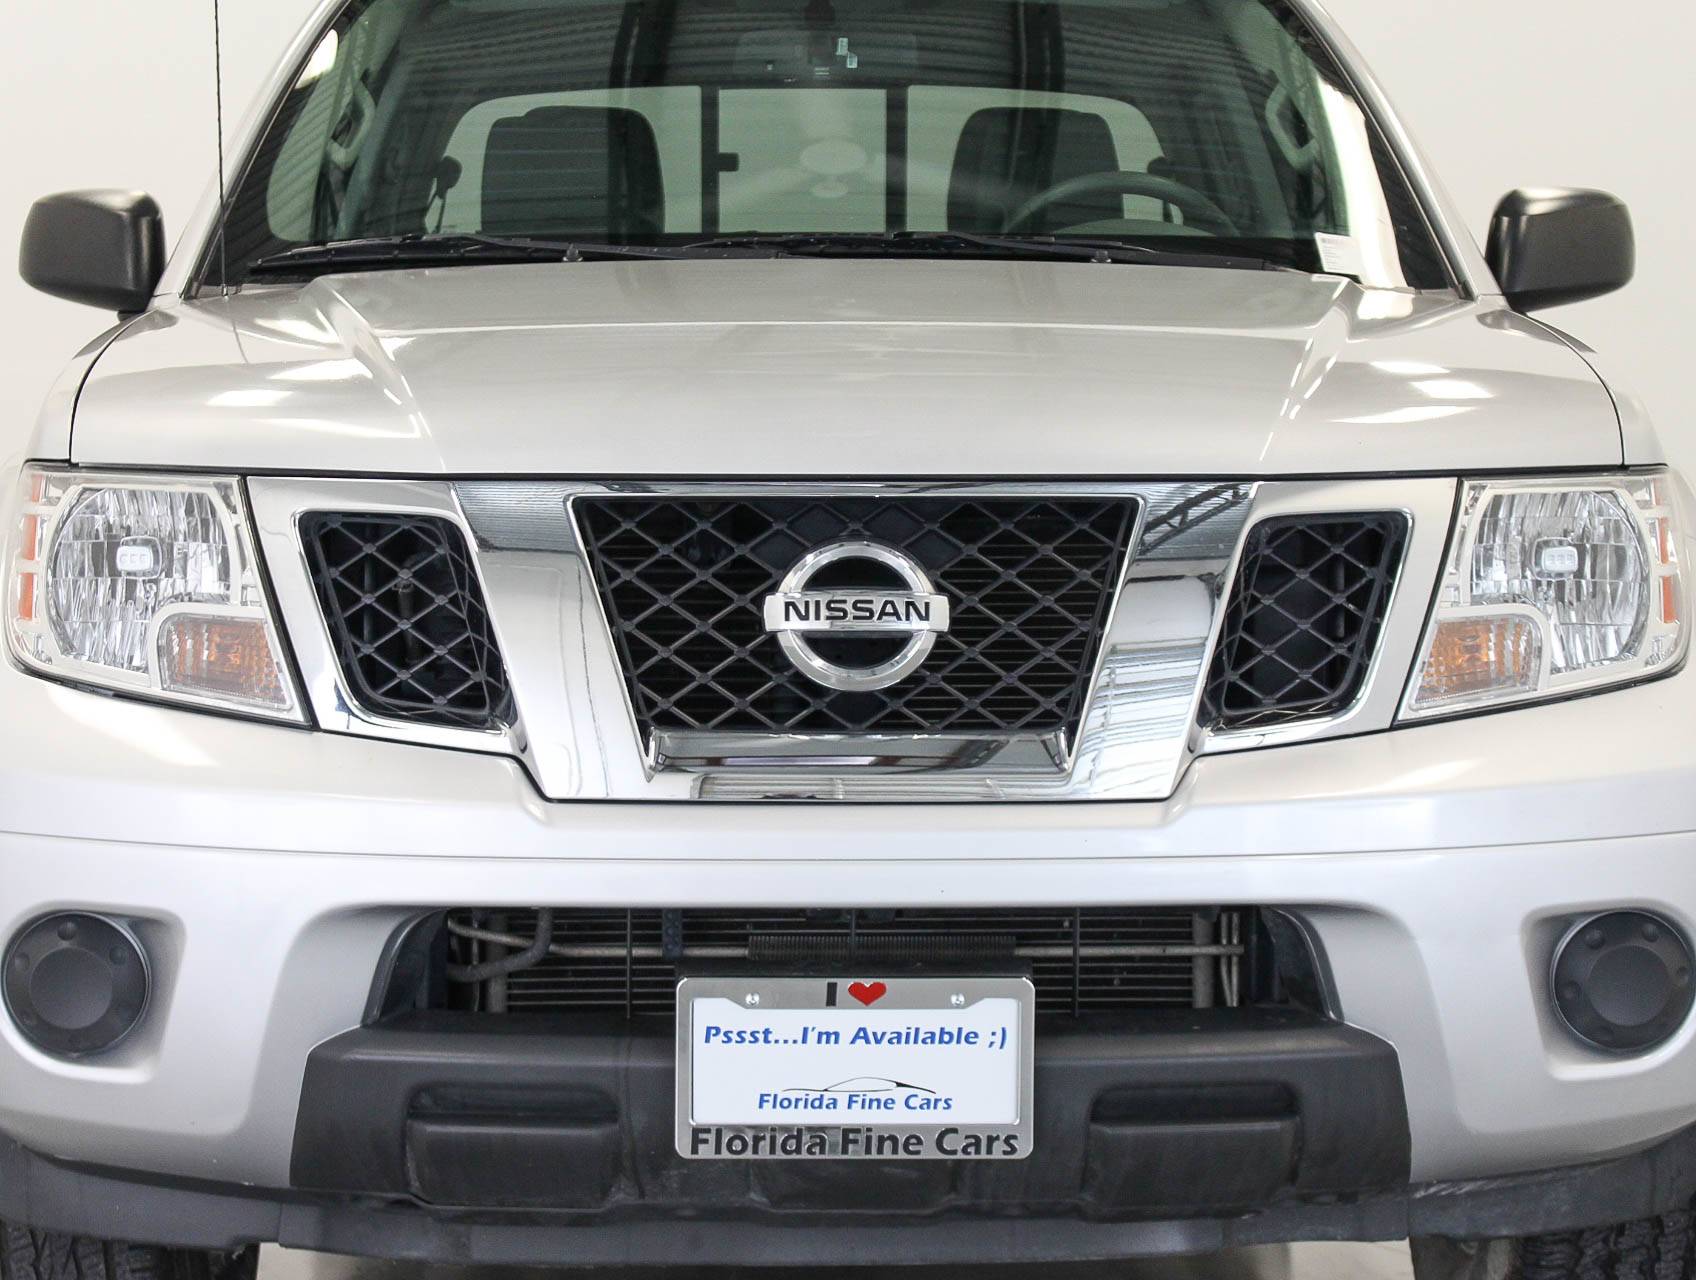 Florida Fine Cars - Used NISSAN FRONTIER 2016 MARGATE Sv